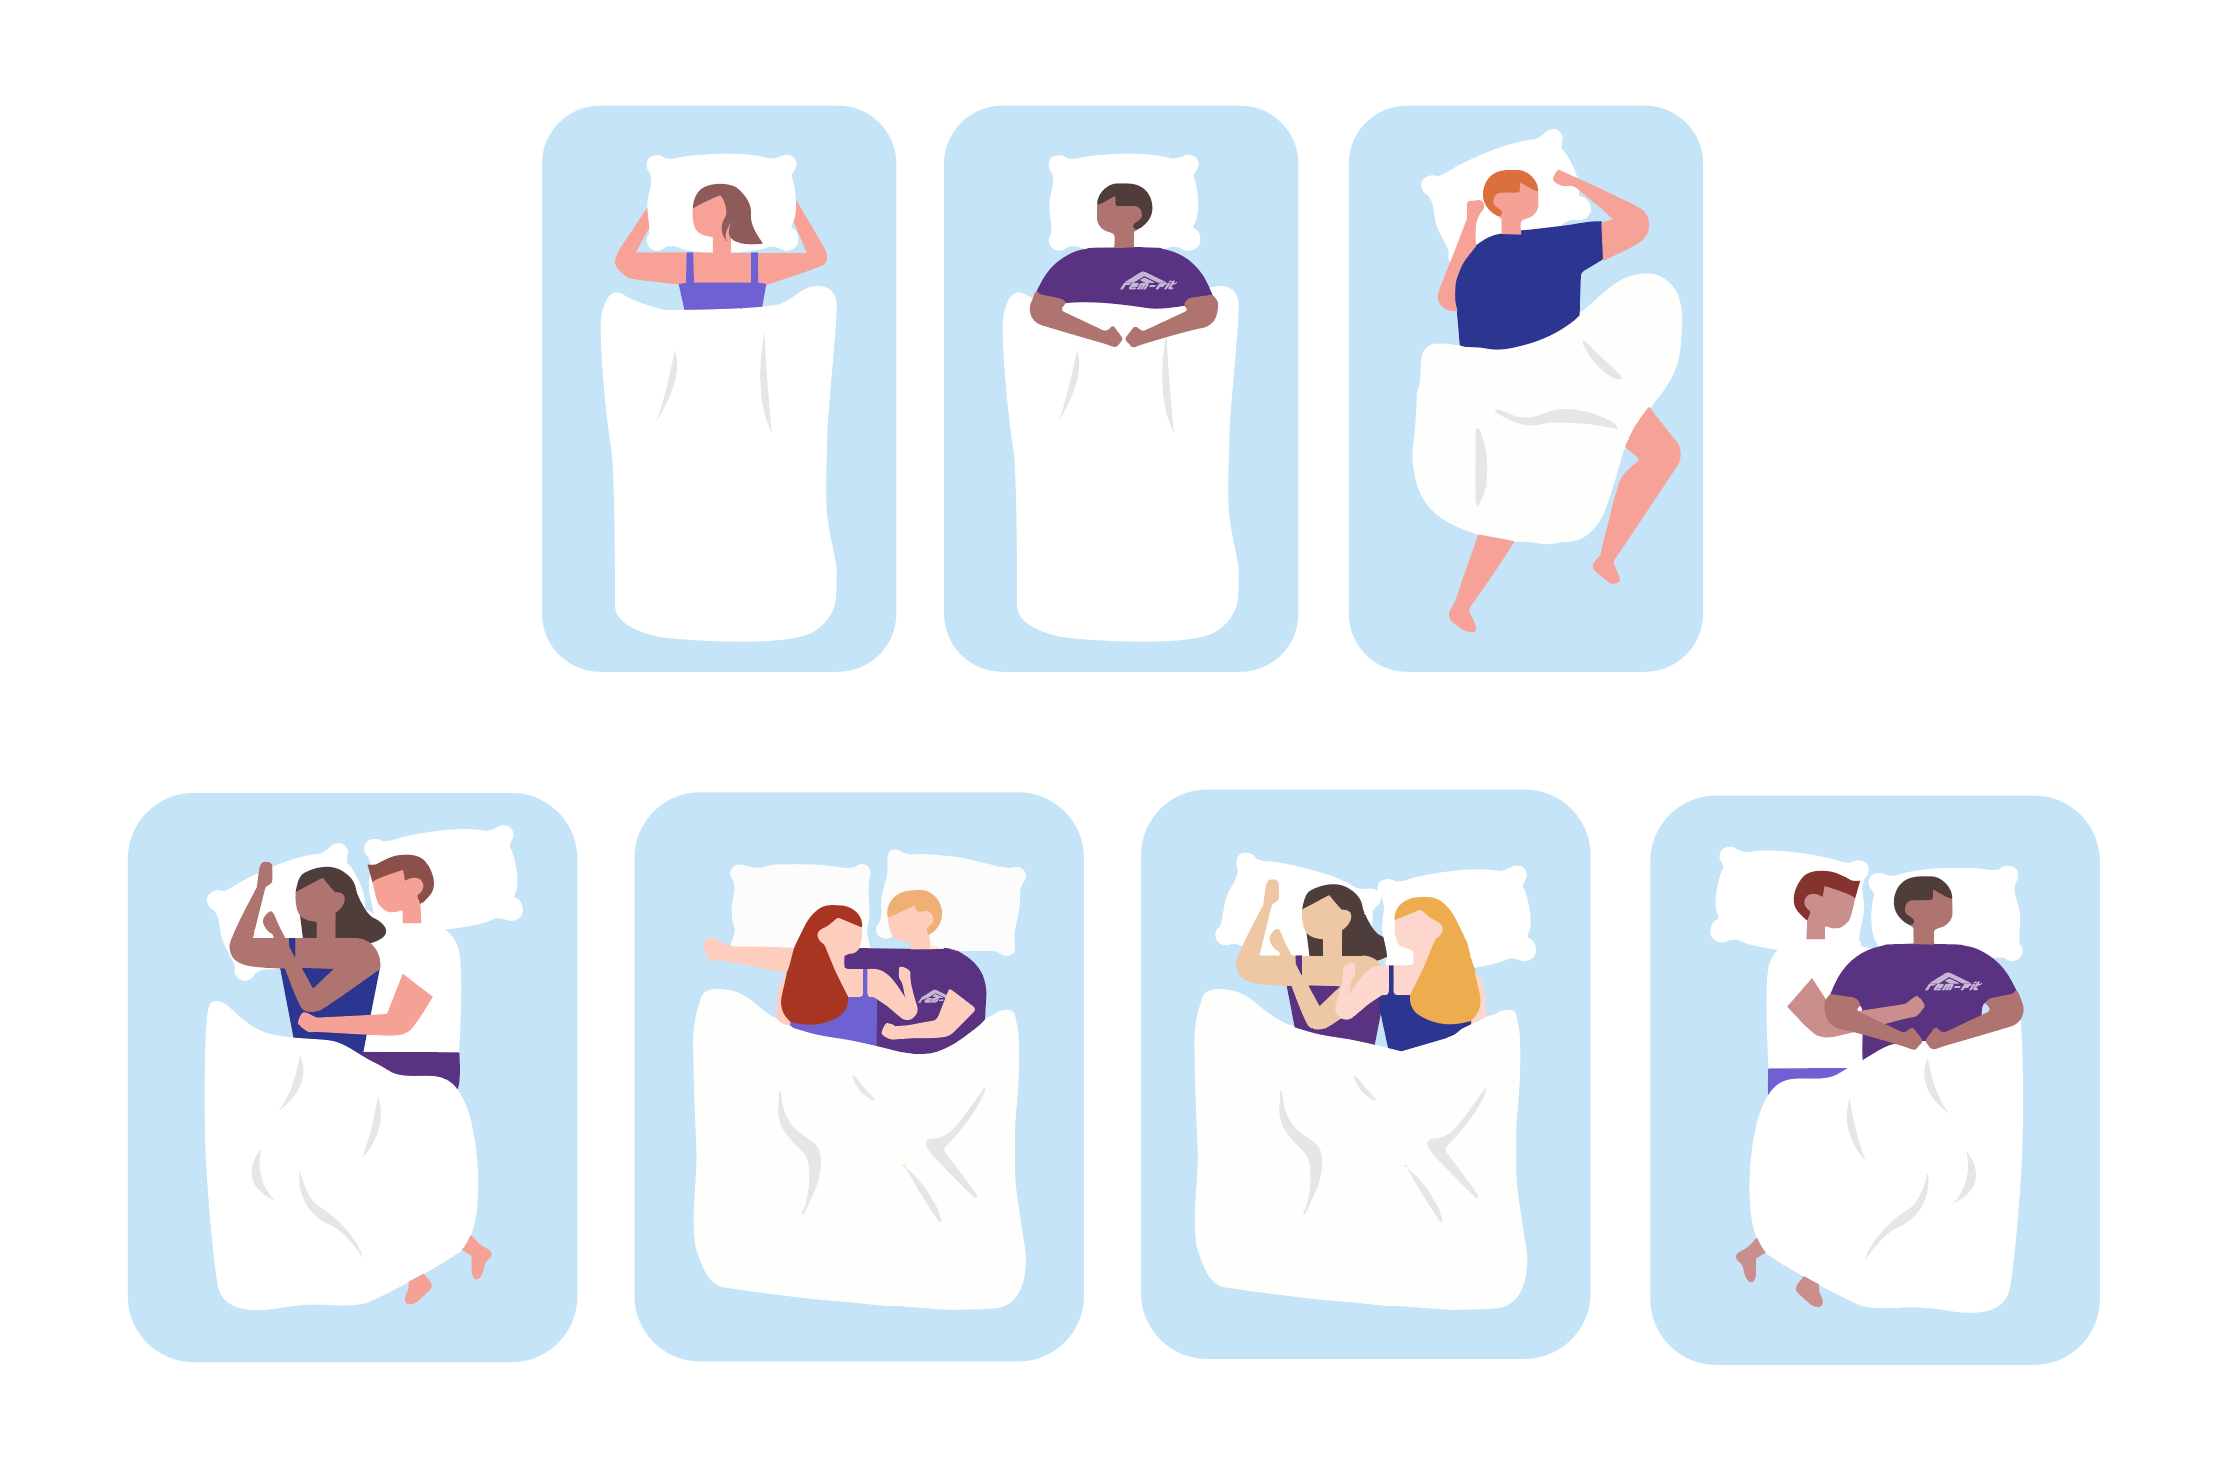 First line of image shows 3 different people in their beds. 1st person is sleeping on her stomach, 2nd and 3rd lines show couples in various sleep positions in bed. 